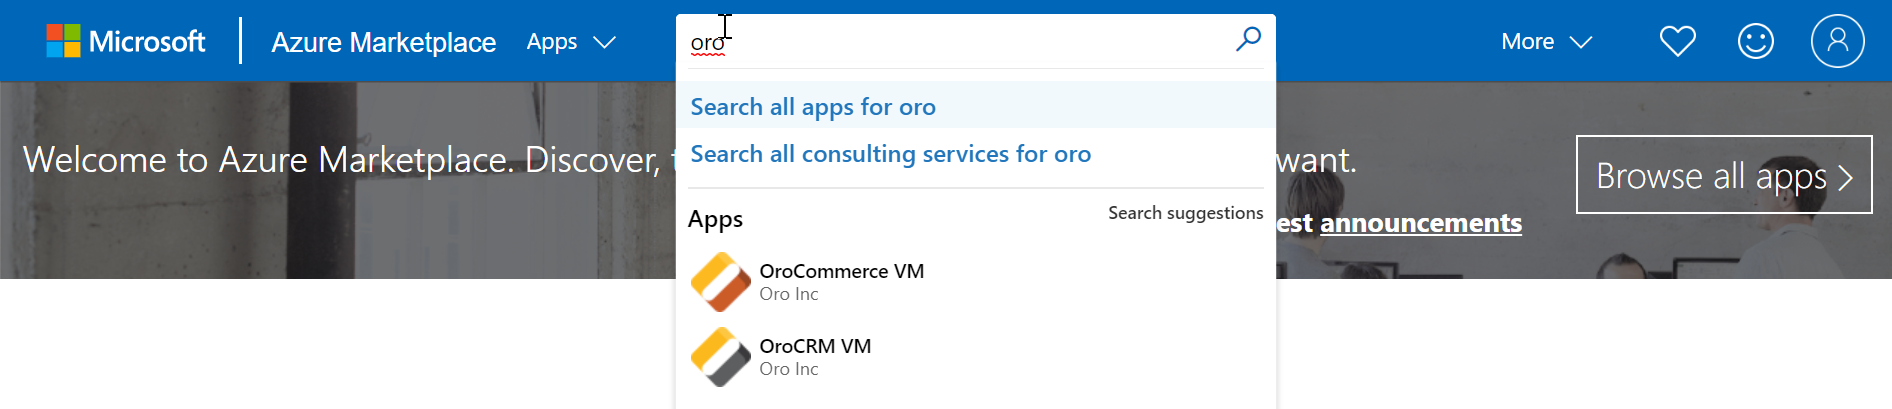 OroCRM VM or OroCommerce VM in Azure Marketplace search dropdown